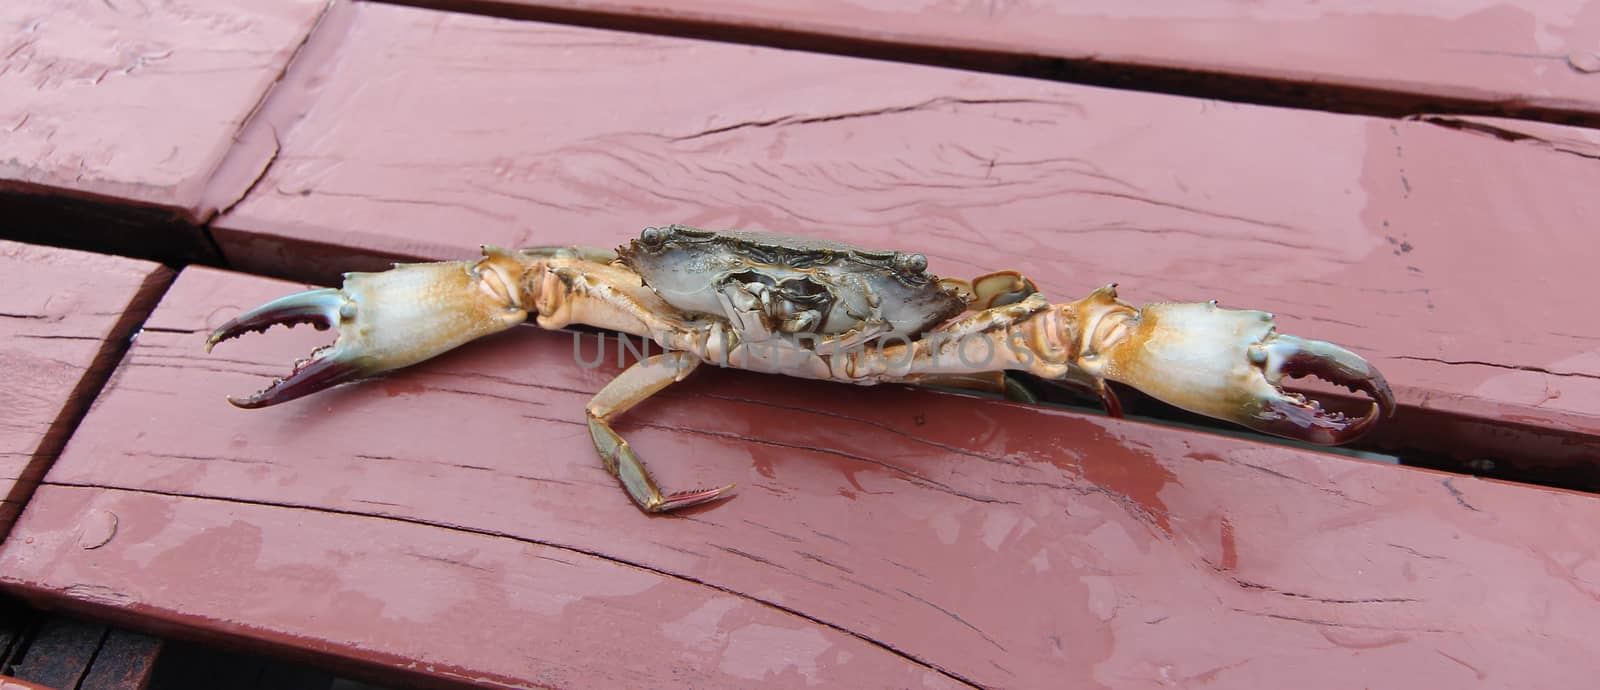 crab attack on wood at home